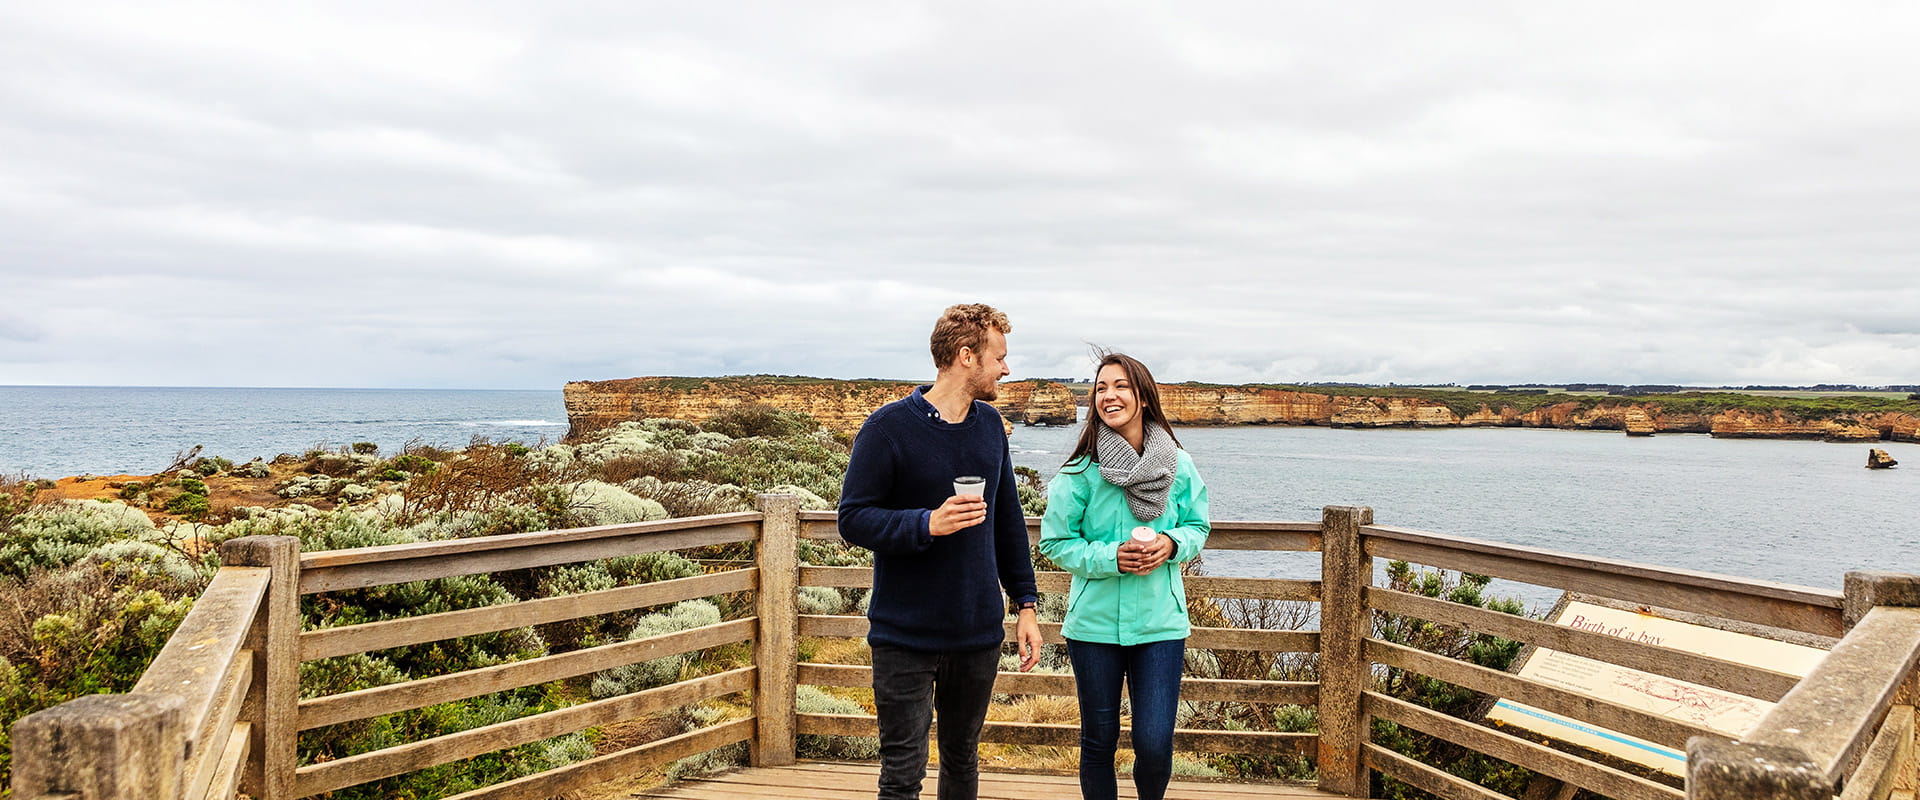 A man and women walk at a lookout overlooking the ocean and sandstone cliffs in the background walk towards the camera.